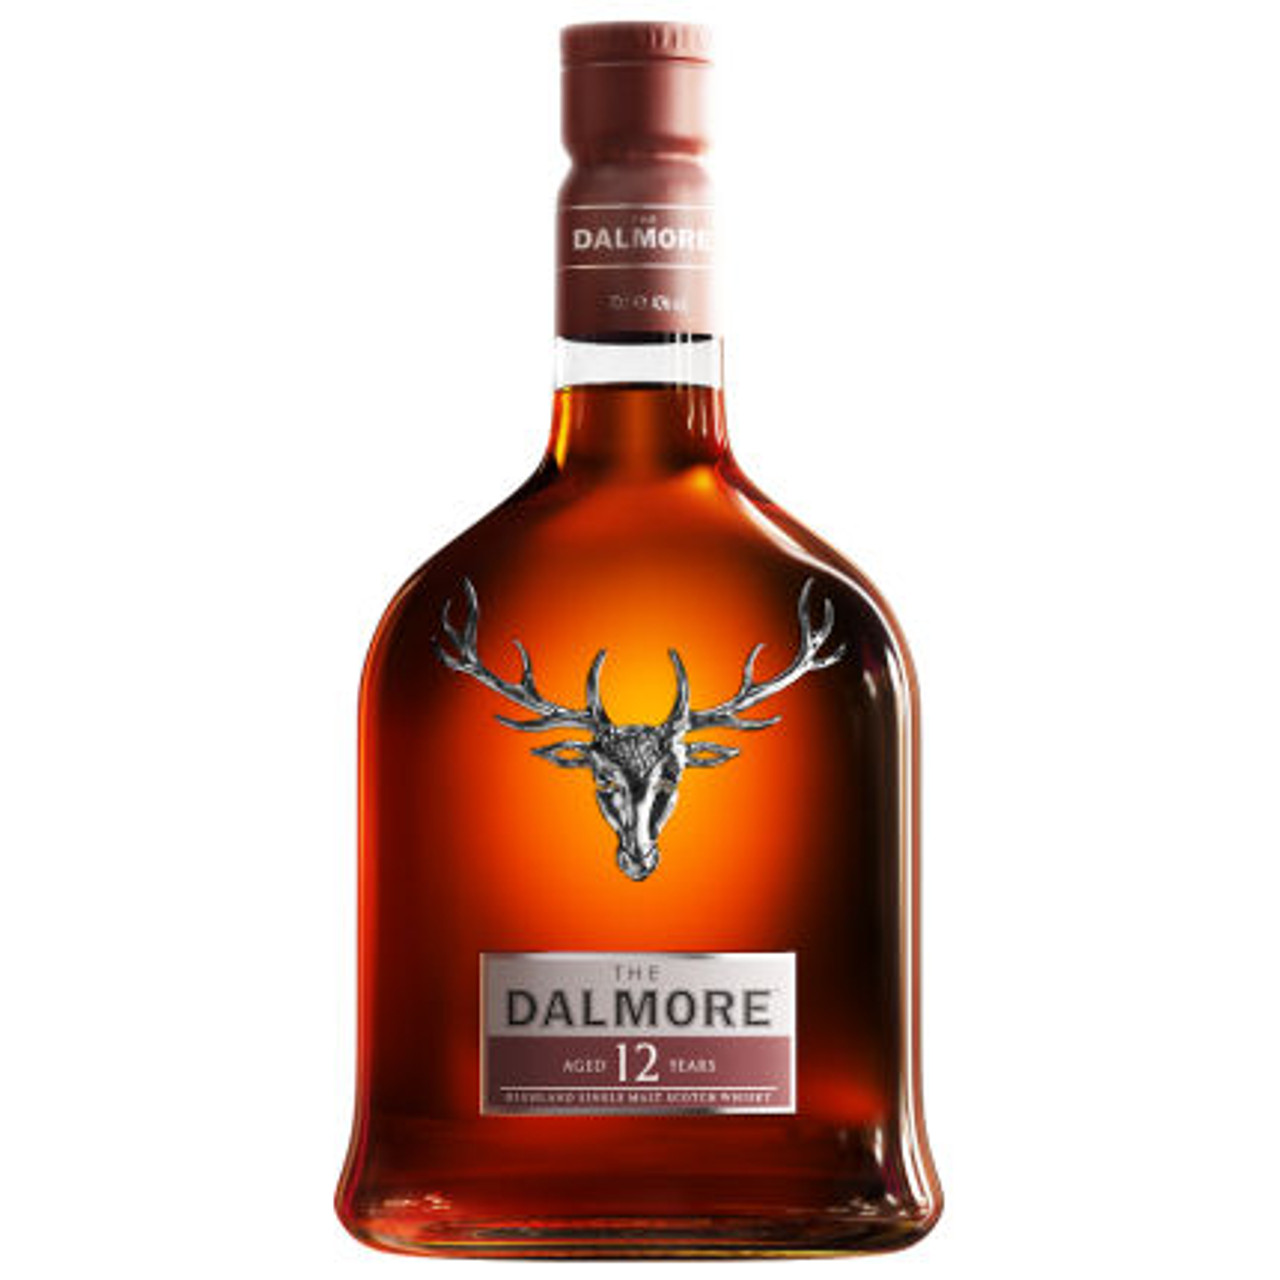 https://cdn11.bigcommerce.com/s-a04d0/images/stencil/1280x1280/products/1887/2281/dalmore-12-year-old-highland-single-malt-scotch__04496.1663005771.jpg?c=2